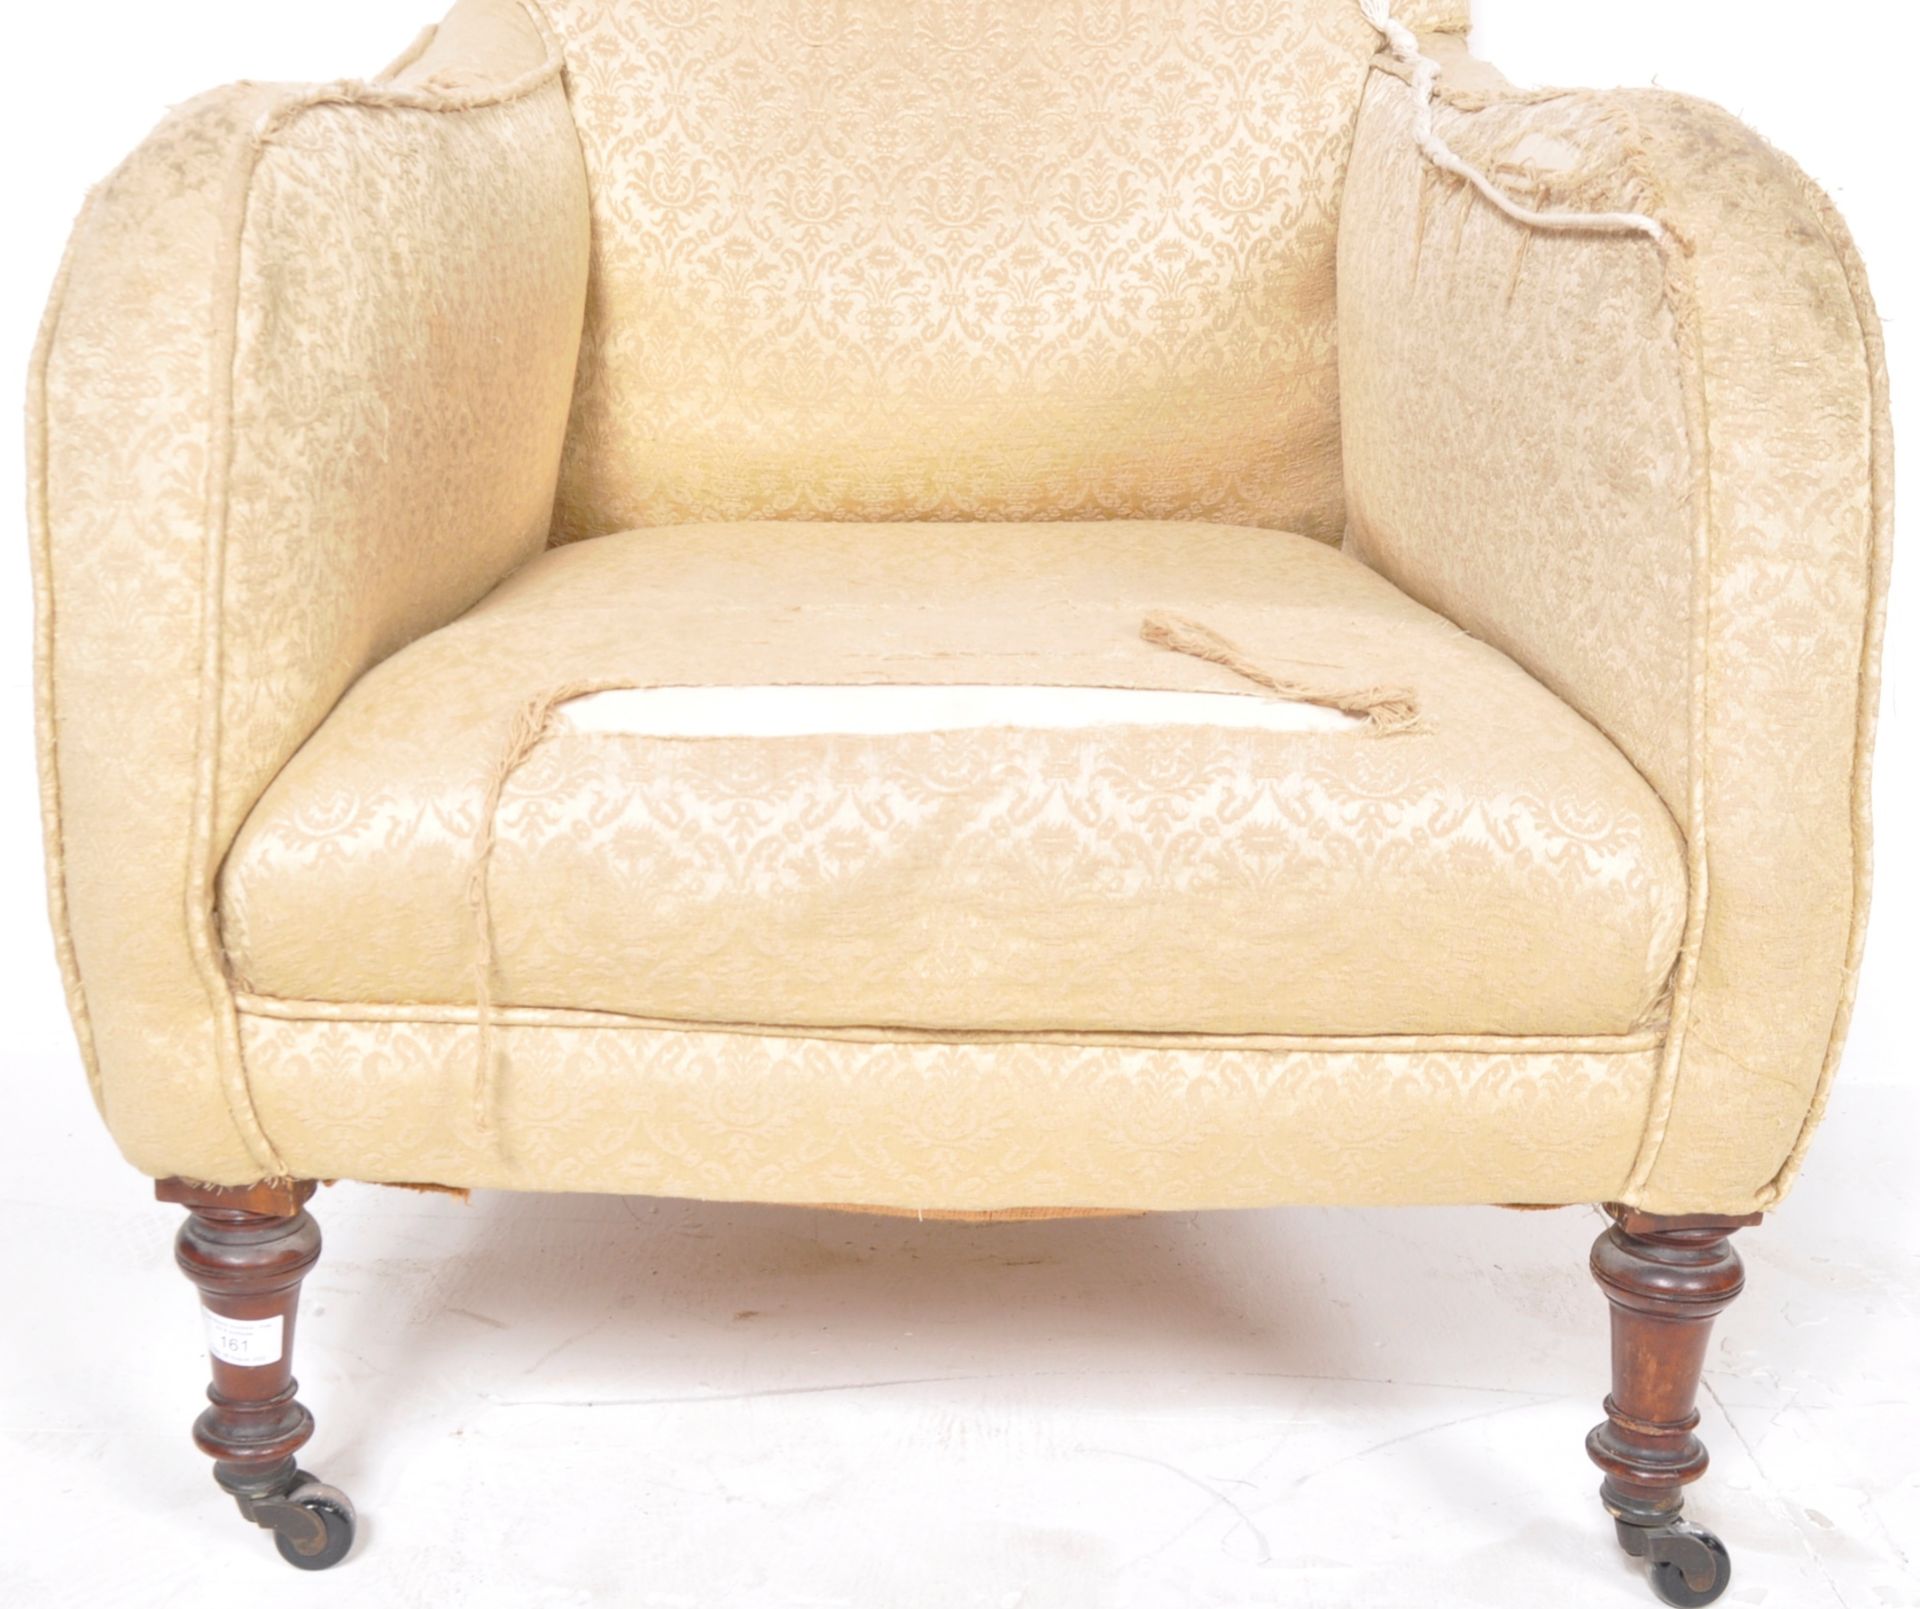 19TH CENTURY VICTORIAN PADDED ARMCHAIR - Image 5 of 8